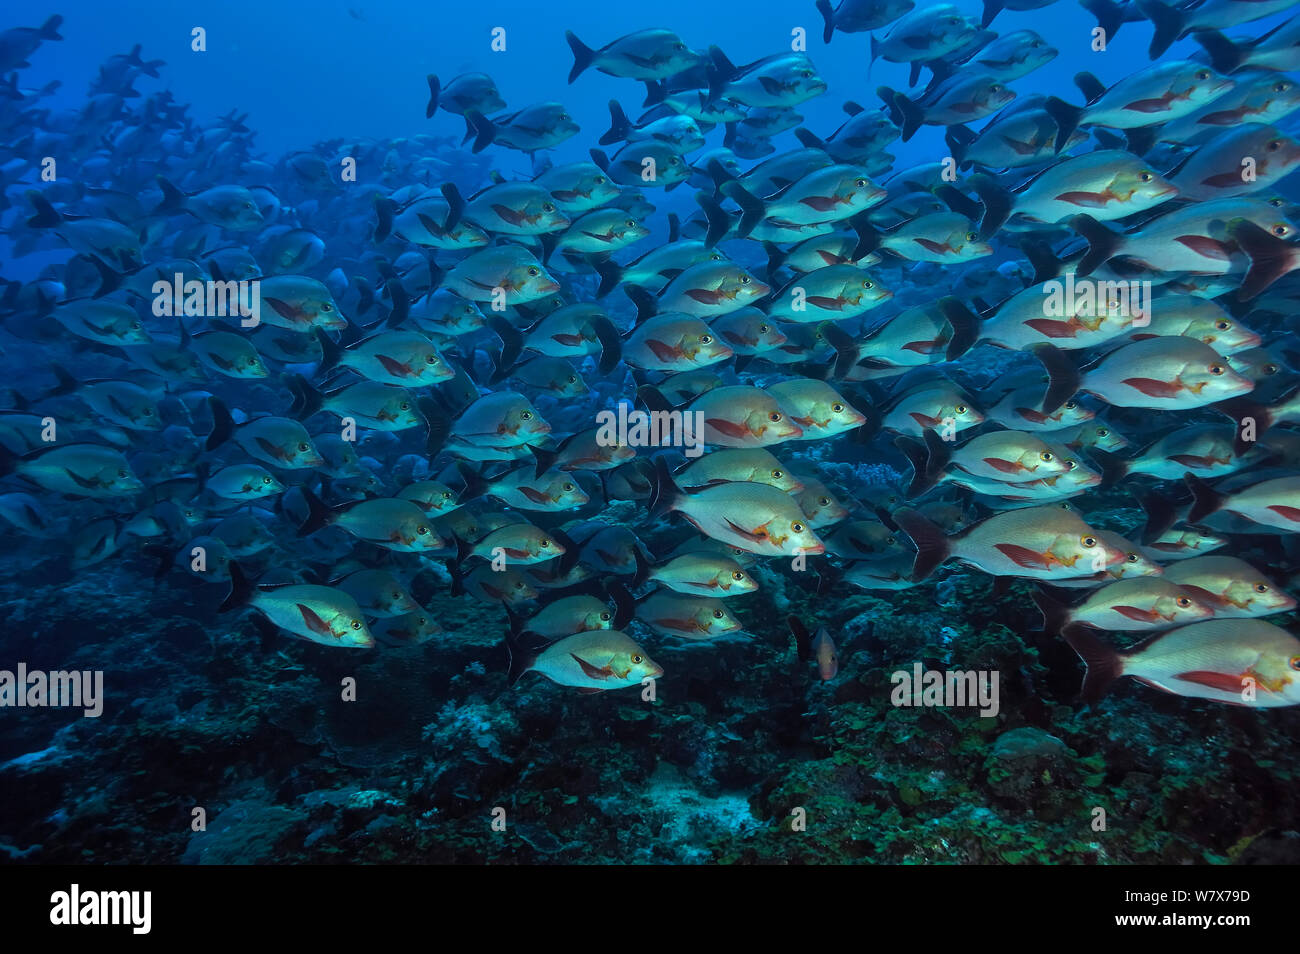 School of Humpback snappers (Lutjanus gibbus) on a coral reef,  Madagascar. Indian Ocean. Stock Photo